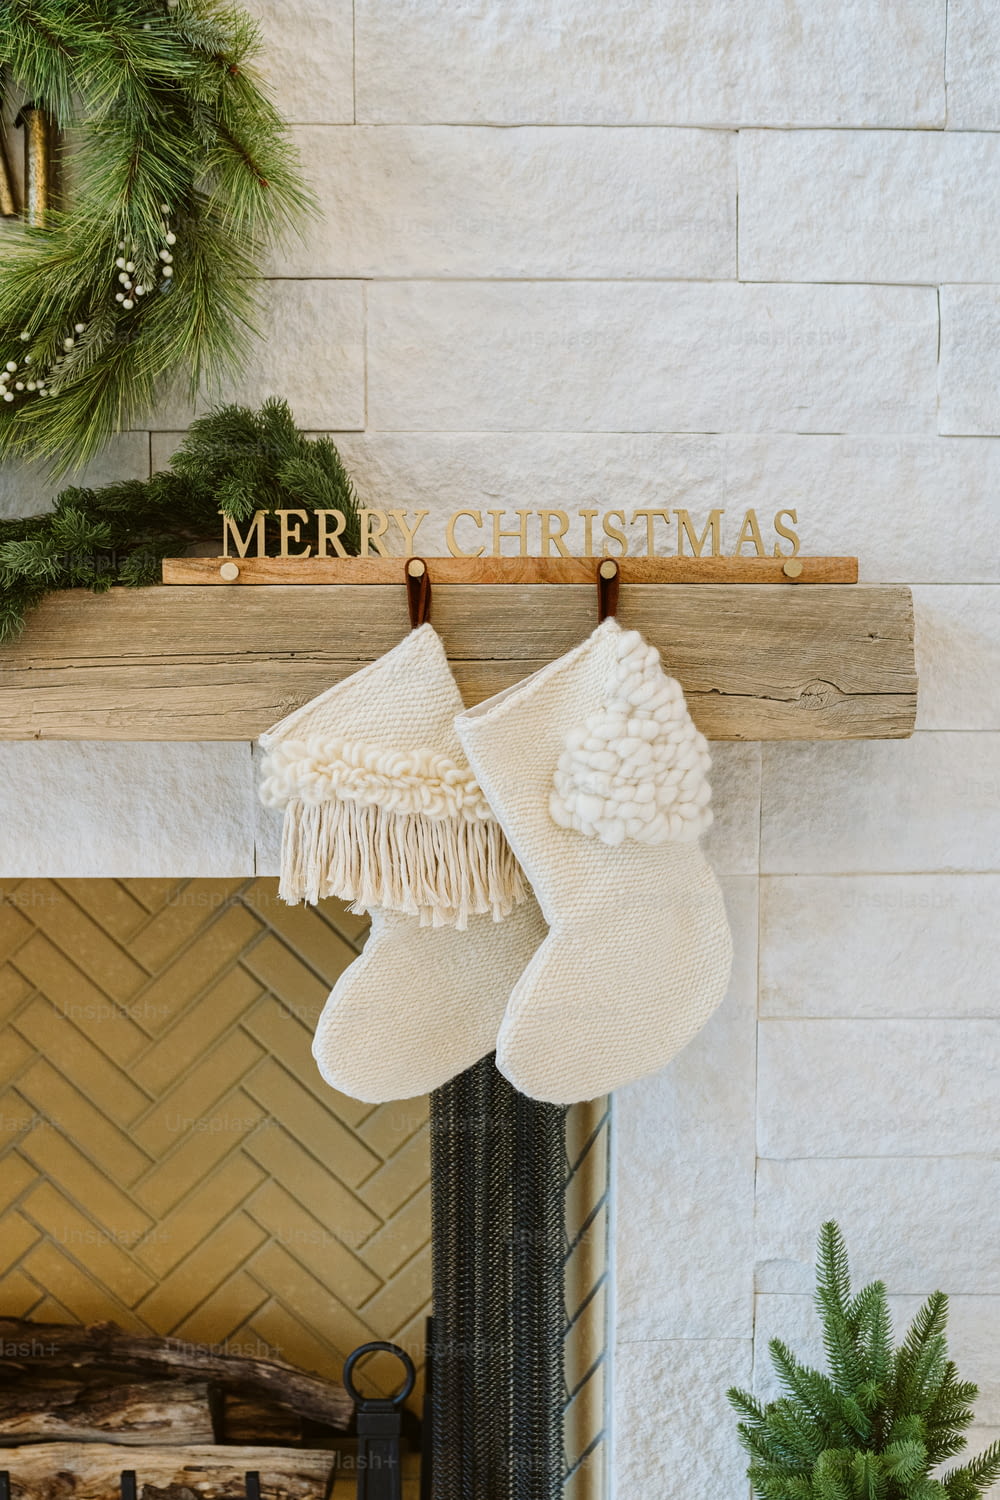 a fireplace with stockings and a merry christmas sign